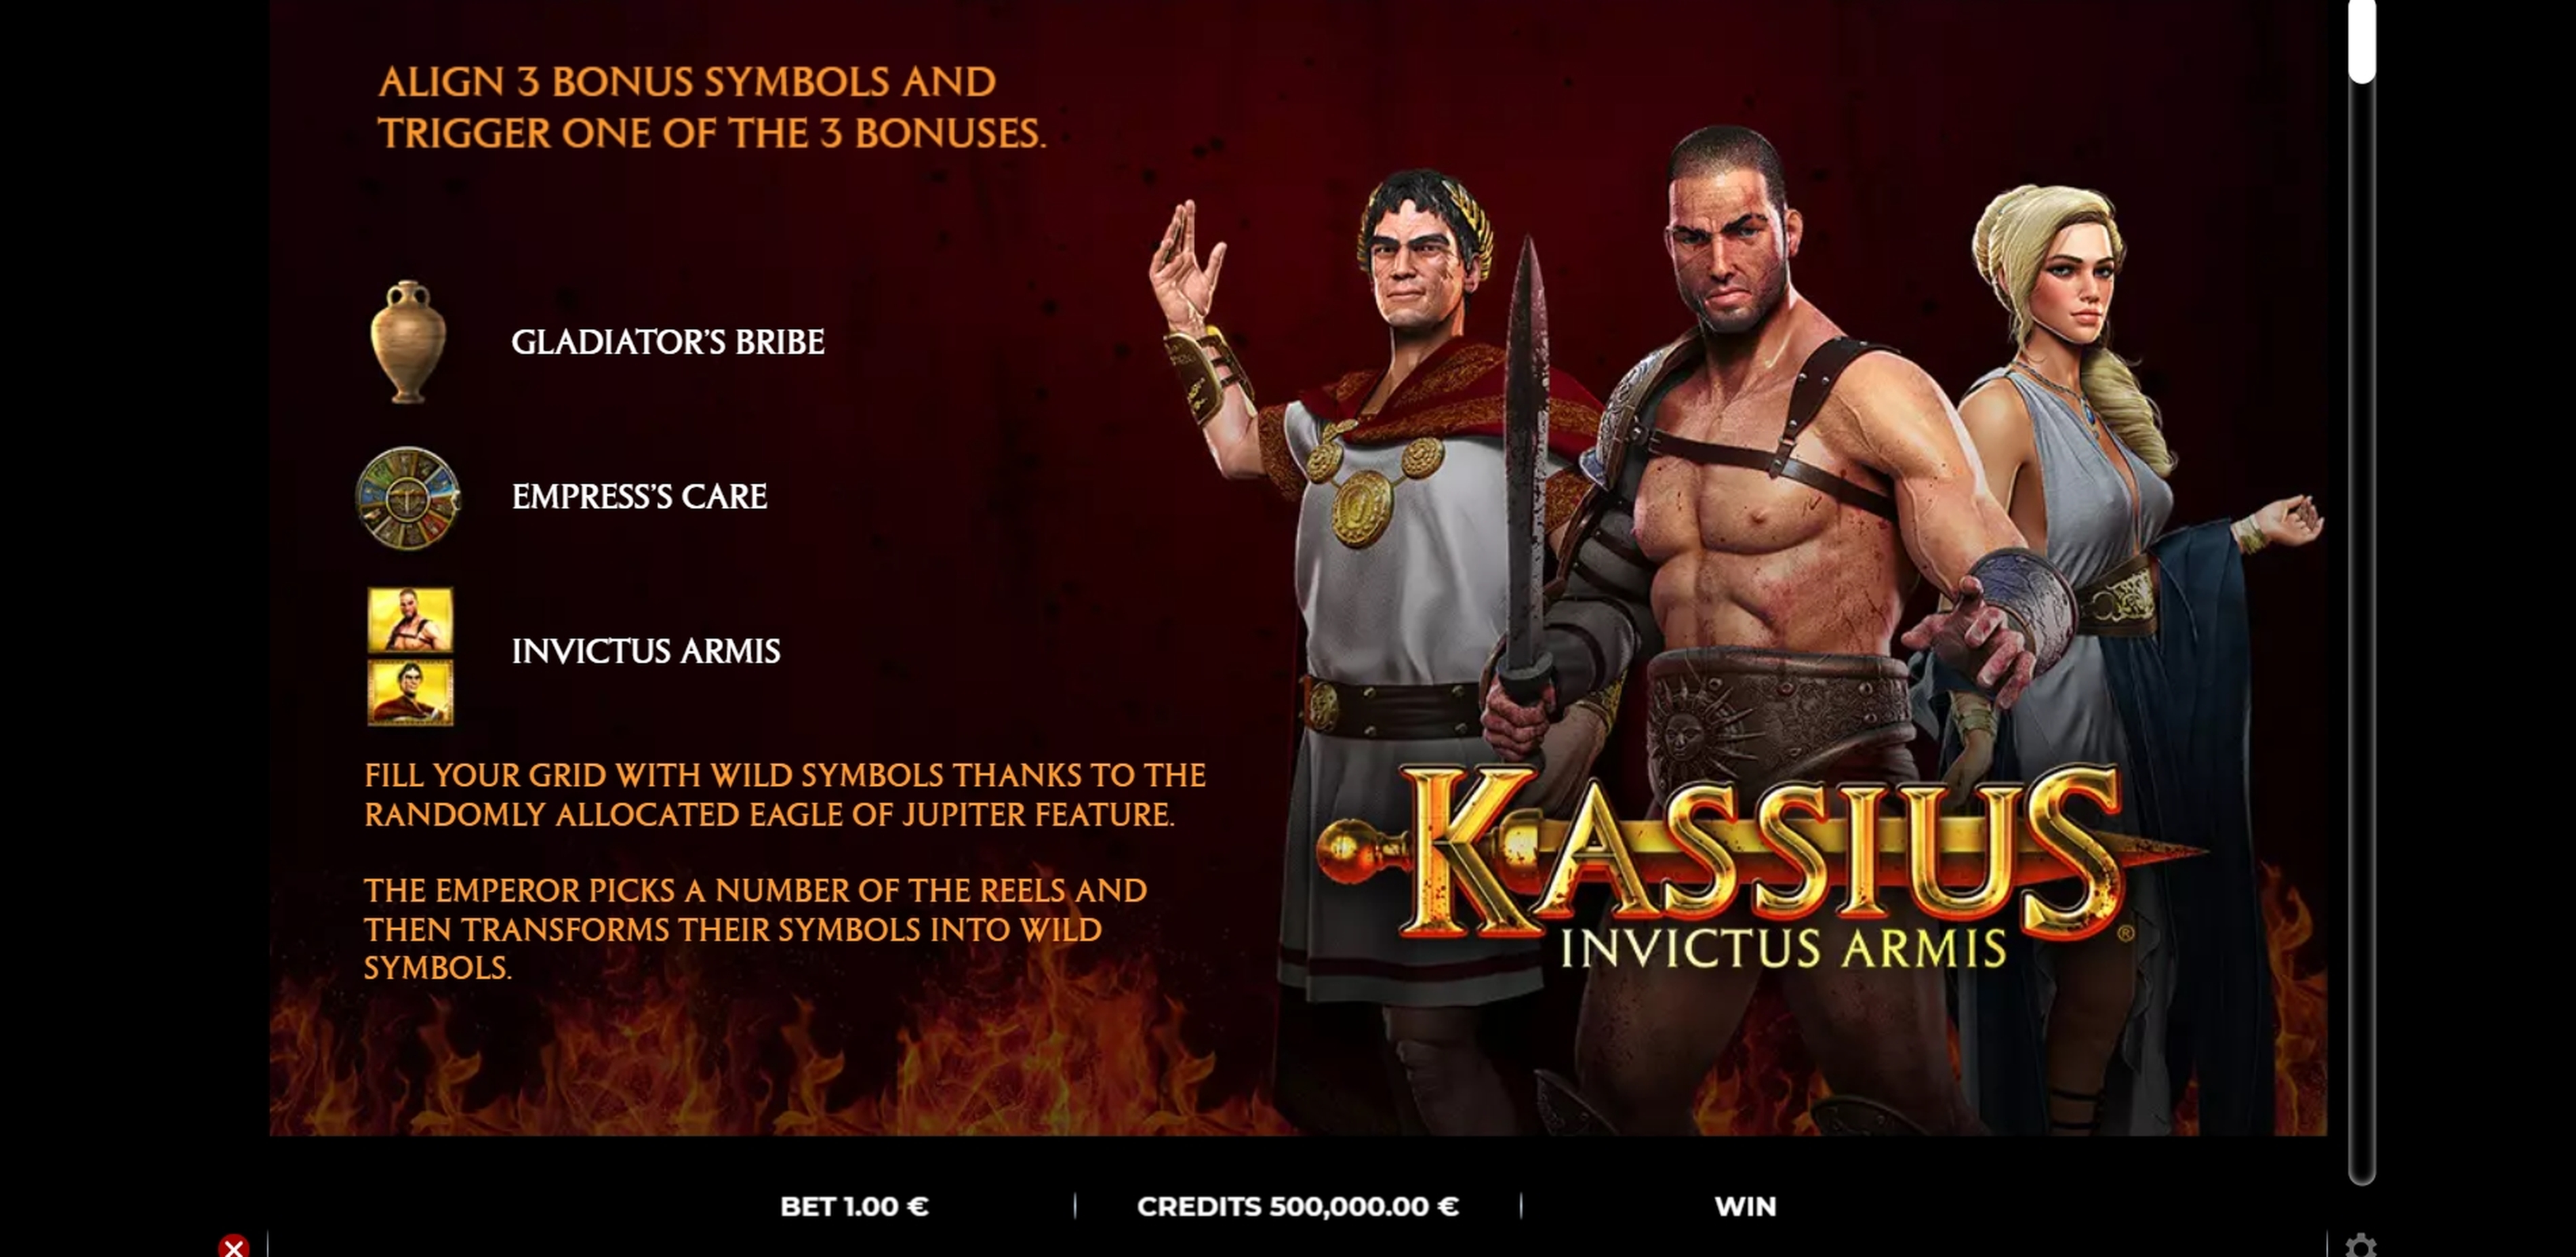 Info of Kassius Invictus Armis Slot Game by GAMING1